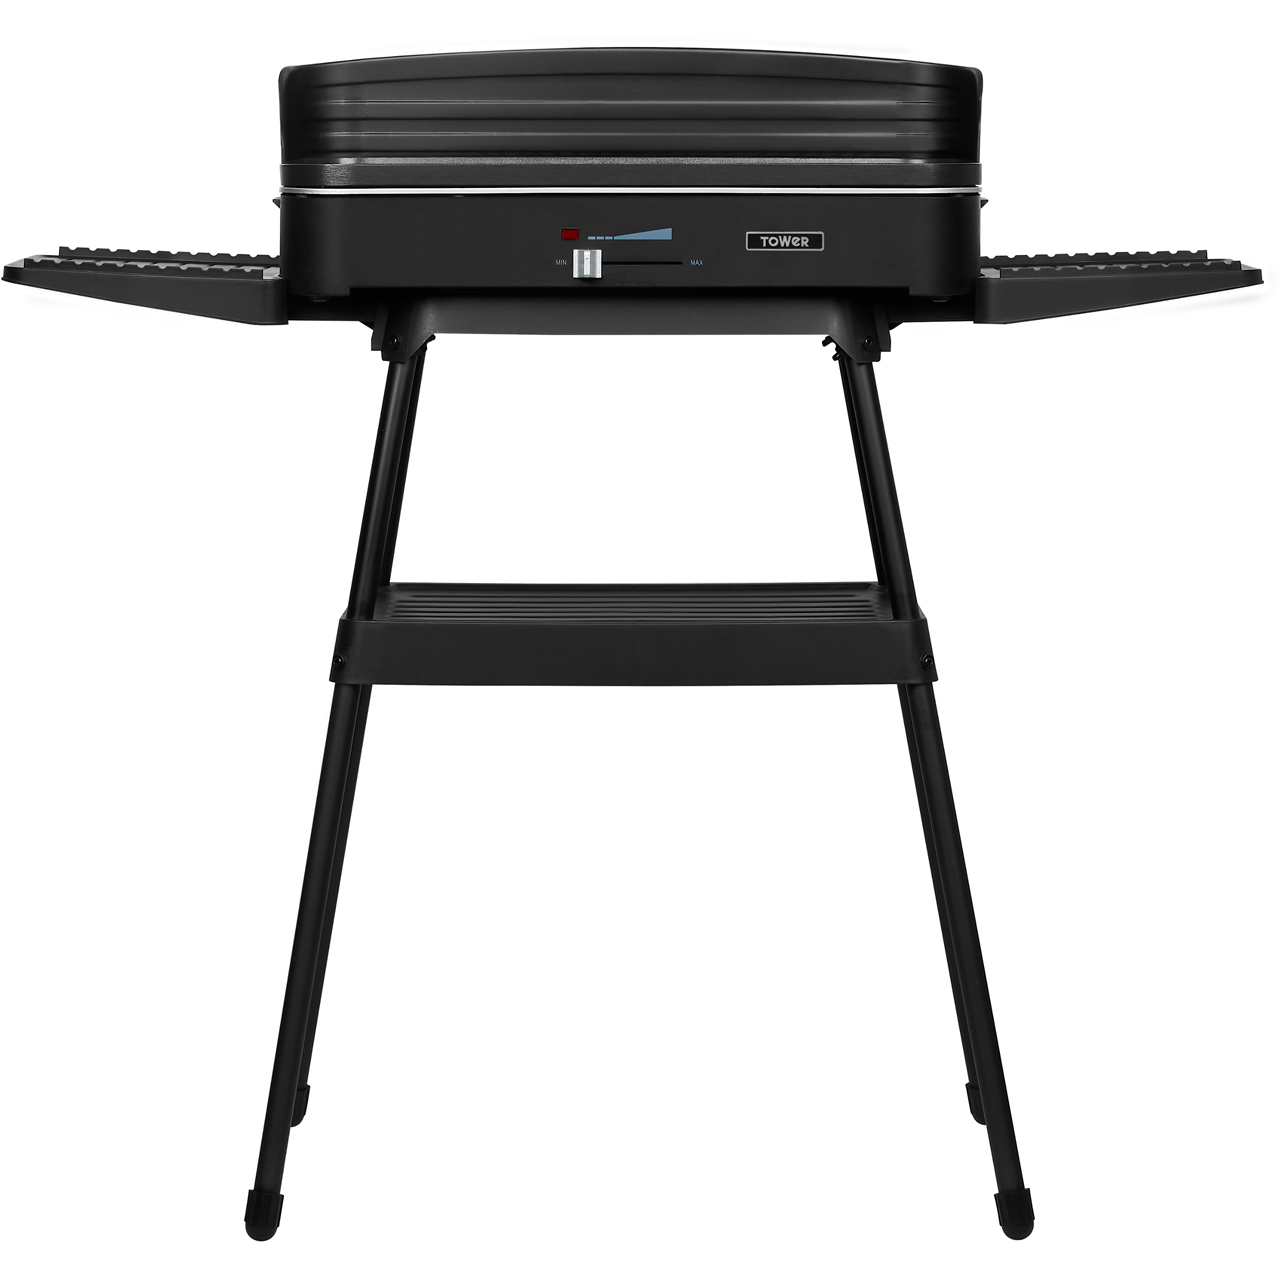 Tower T14028 Health Grill Review